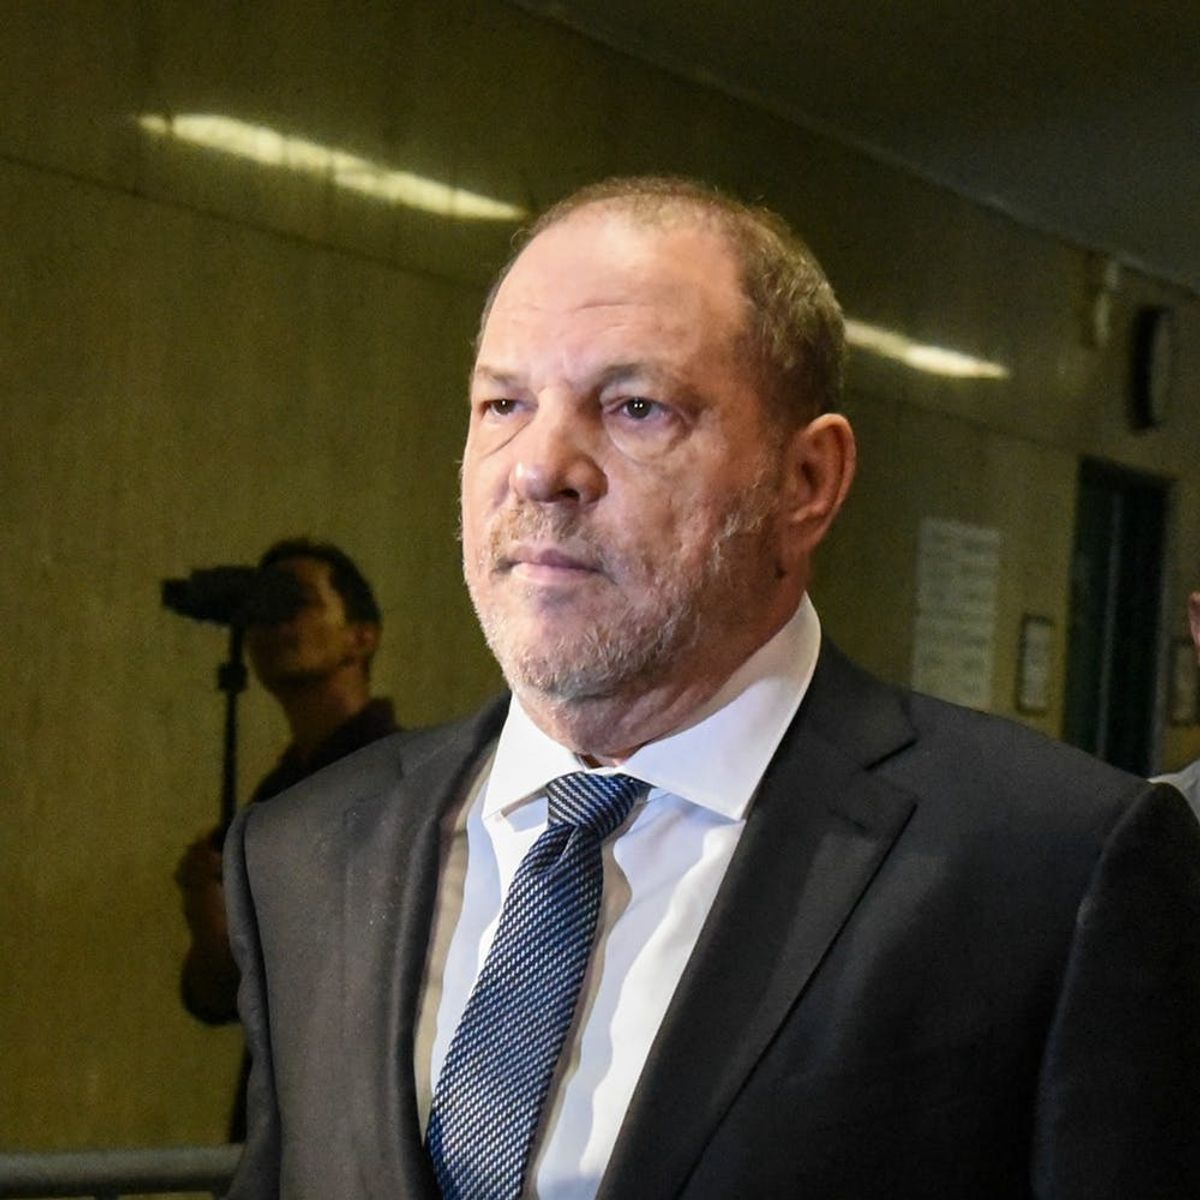 Surrounded by Time’s Up Activists, New York Judge Declined to Dismiss Charges Against Harvey Weinstein